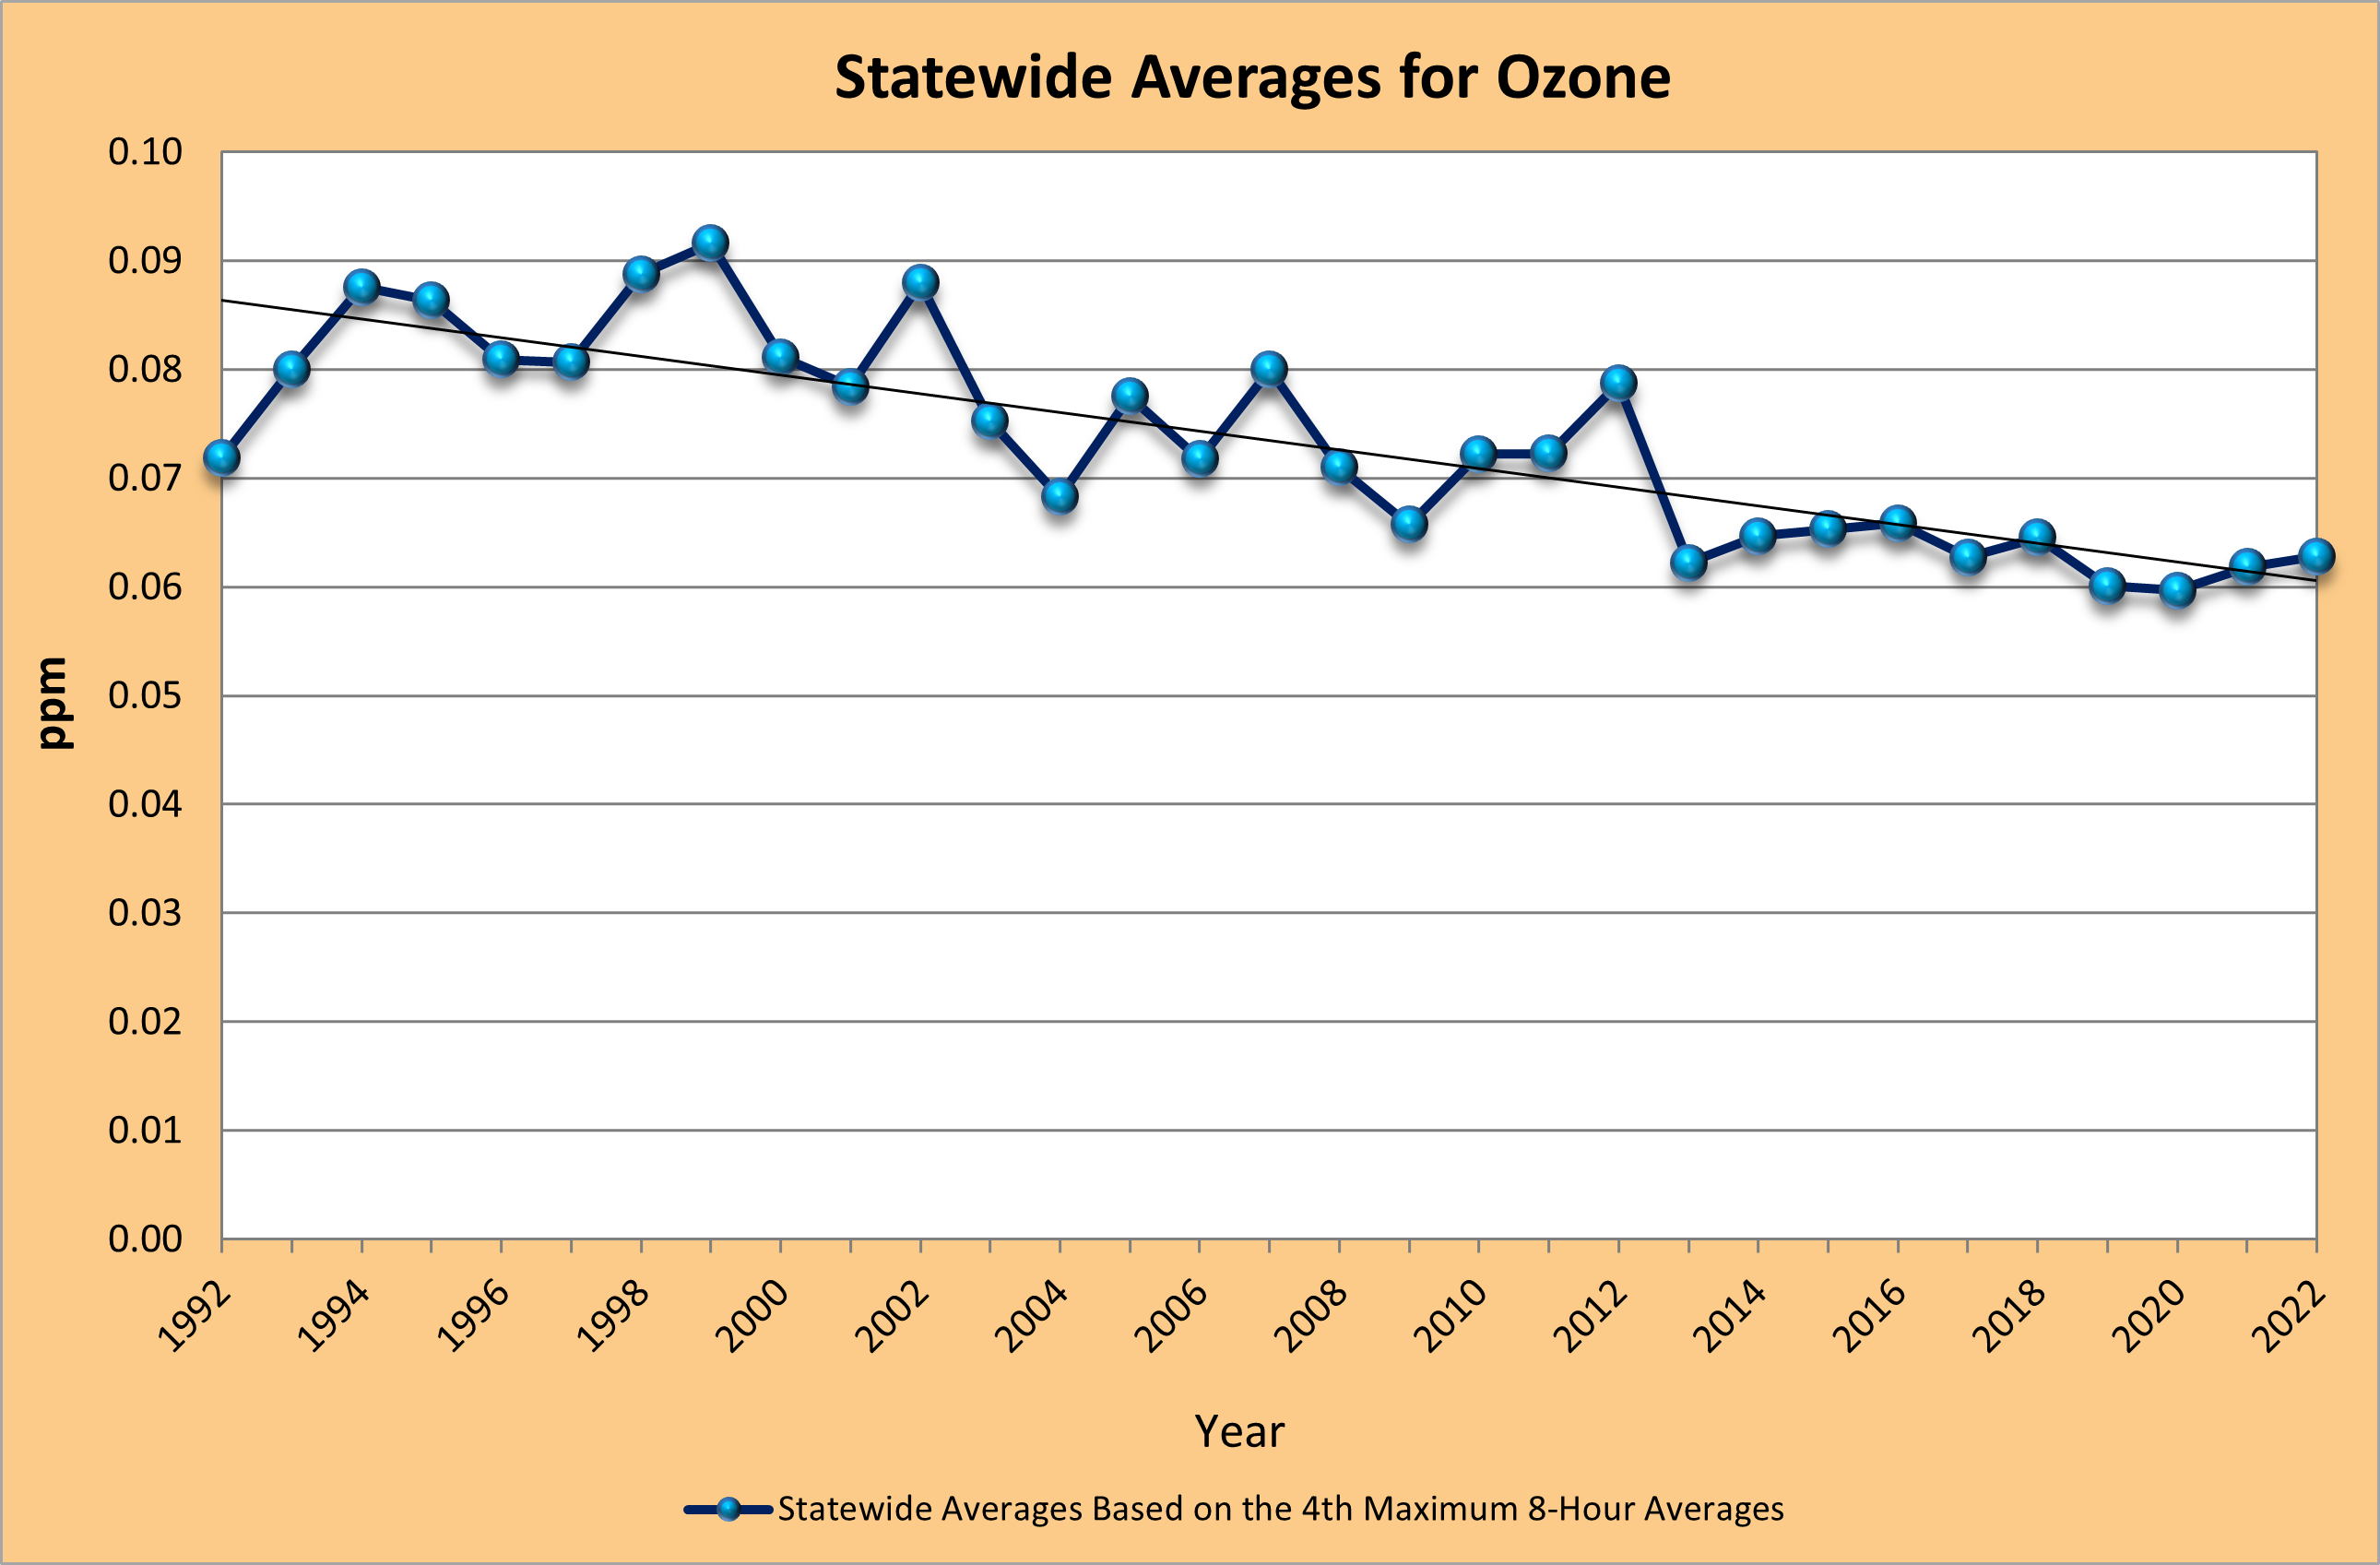 Ambient air monitoring data for ozone averaged across the state.